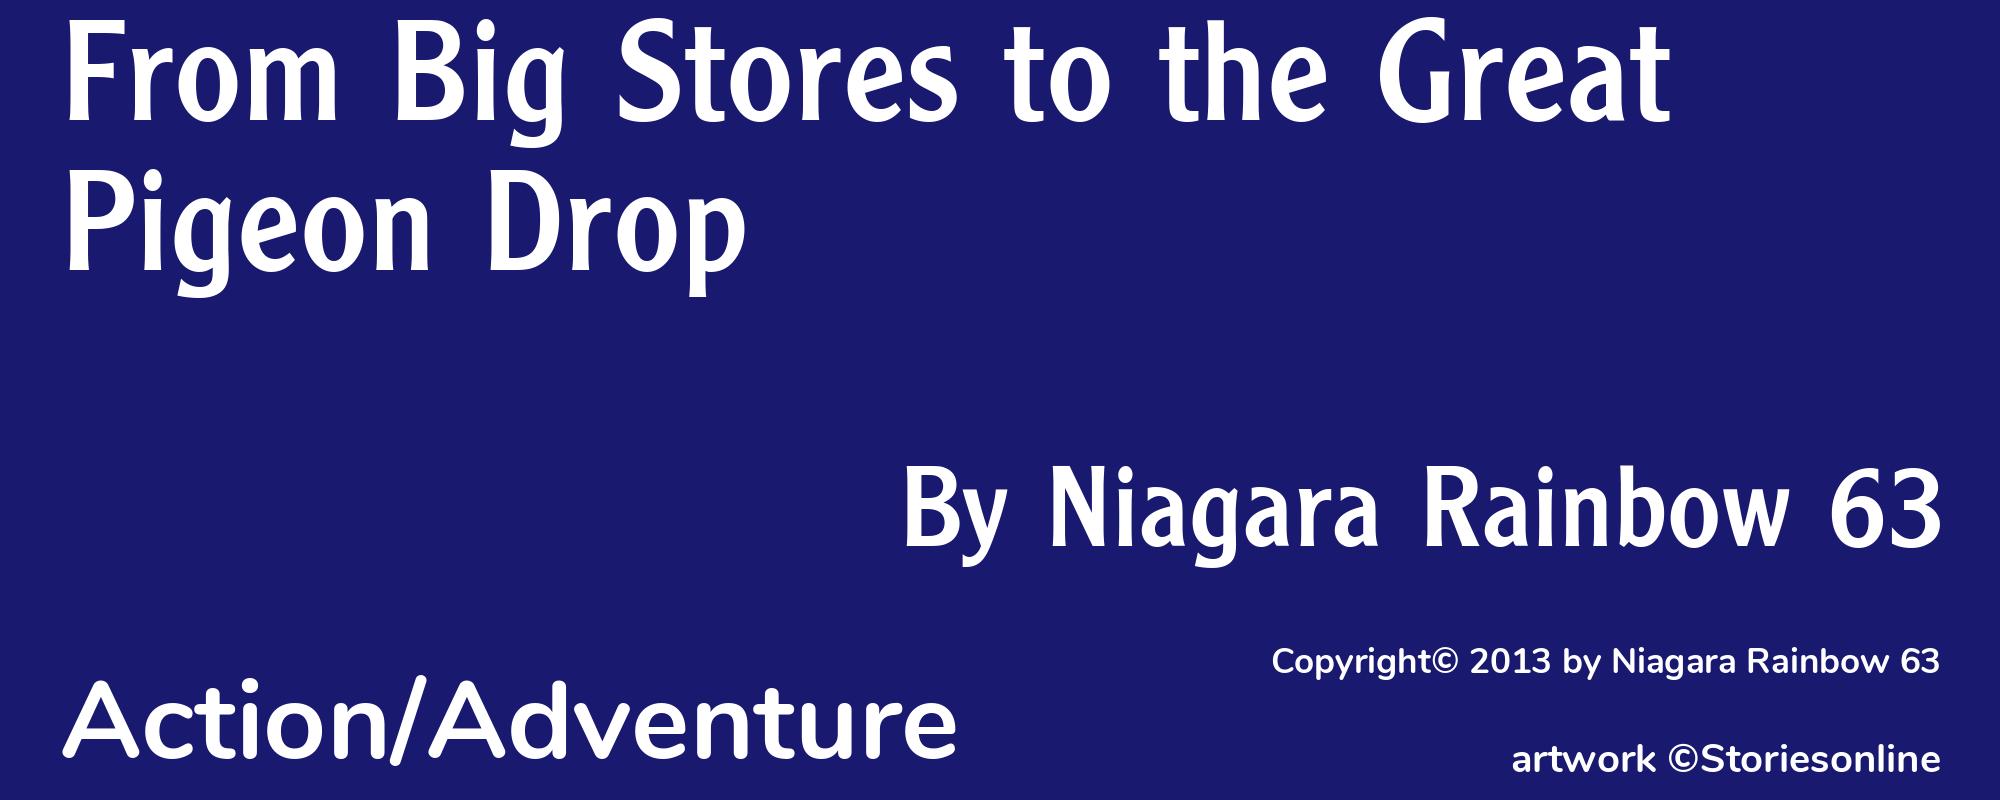 From Big Stores to the Great Pigeon Drop - Cover